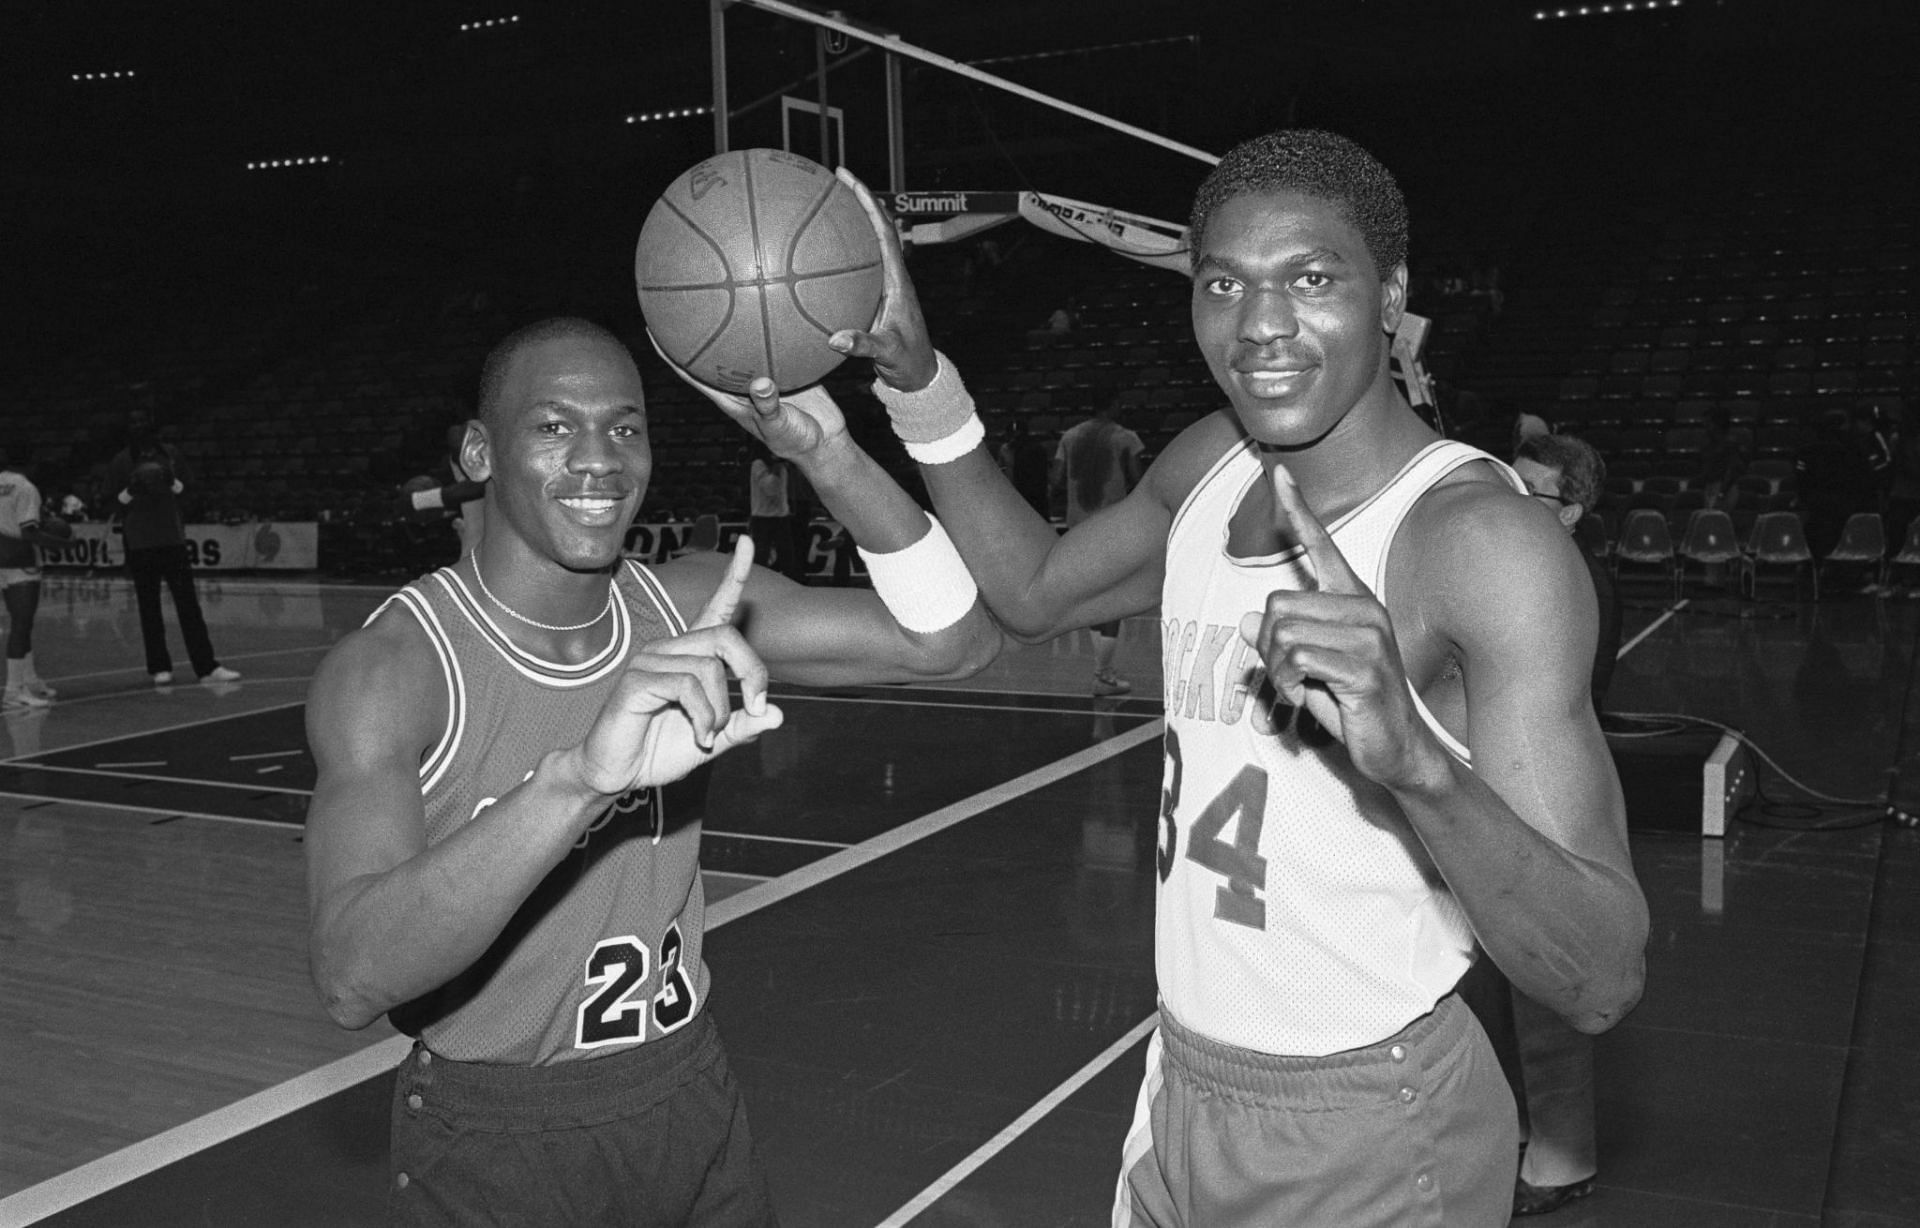 The Houston Rockets could have drafted Hakeem Olajuwon and Michael Jordan in 1984. [Photo: Chron]